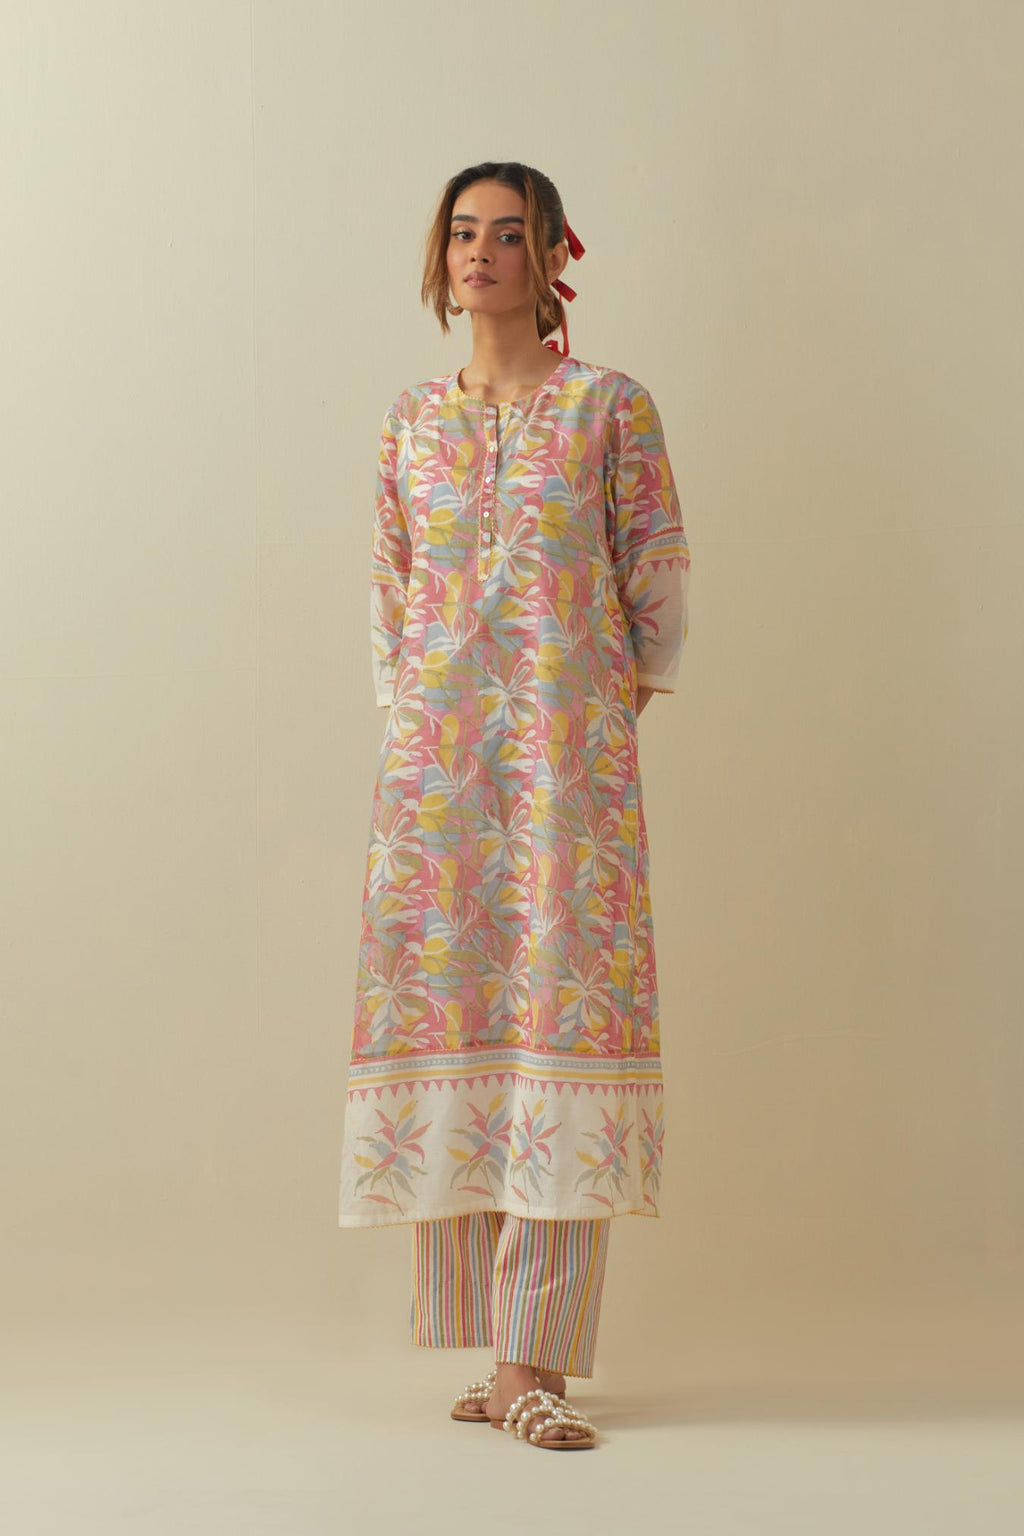 Off white cotton chanderi hand block printed kurta set with multi colored flower and border detail at hem.